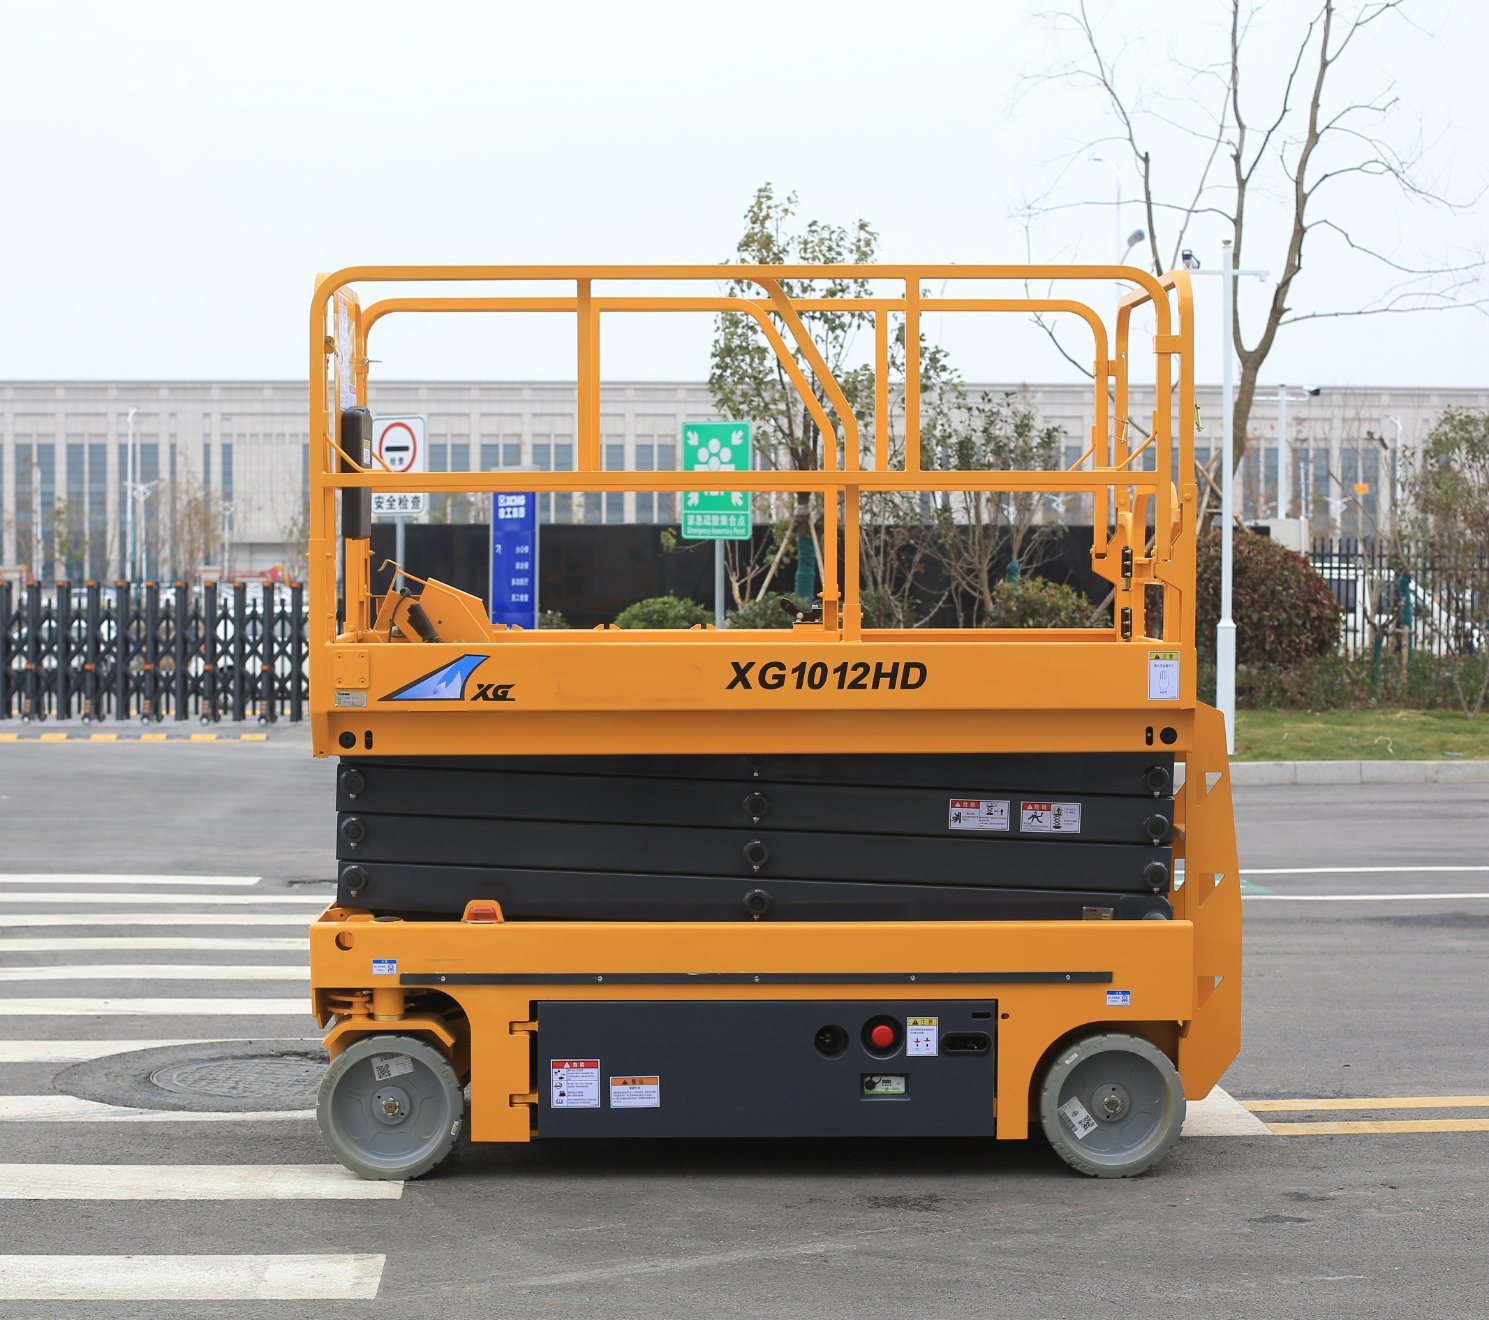 Mobile Portable Hydraulic Aerial Lifts/Sing Mast Aluminum Lift Platform Xg0807dcw Xg1012HD with 8m 10m Lifting Height